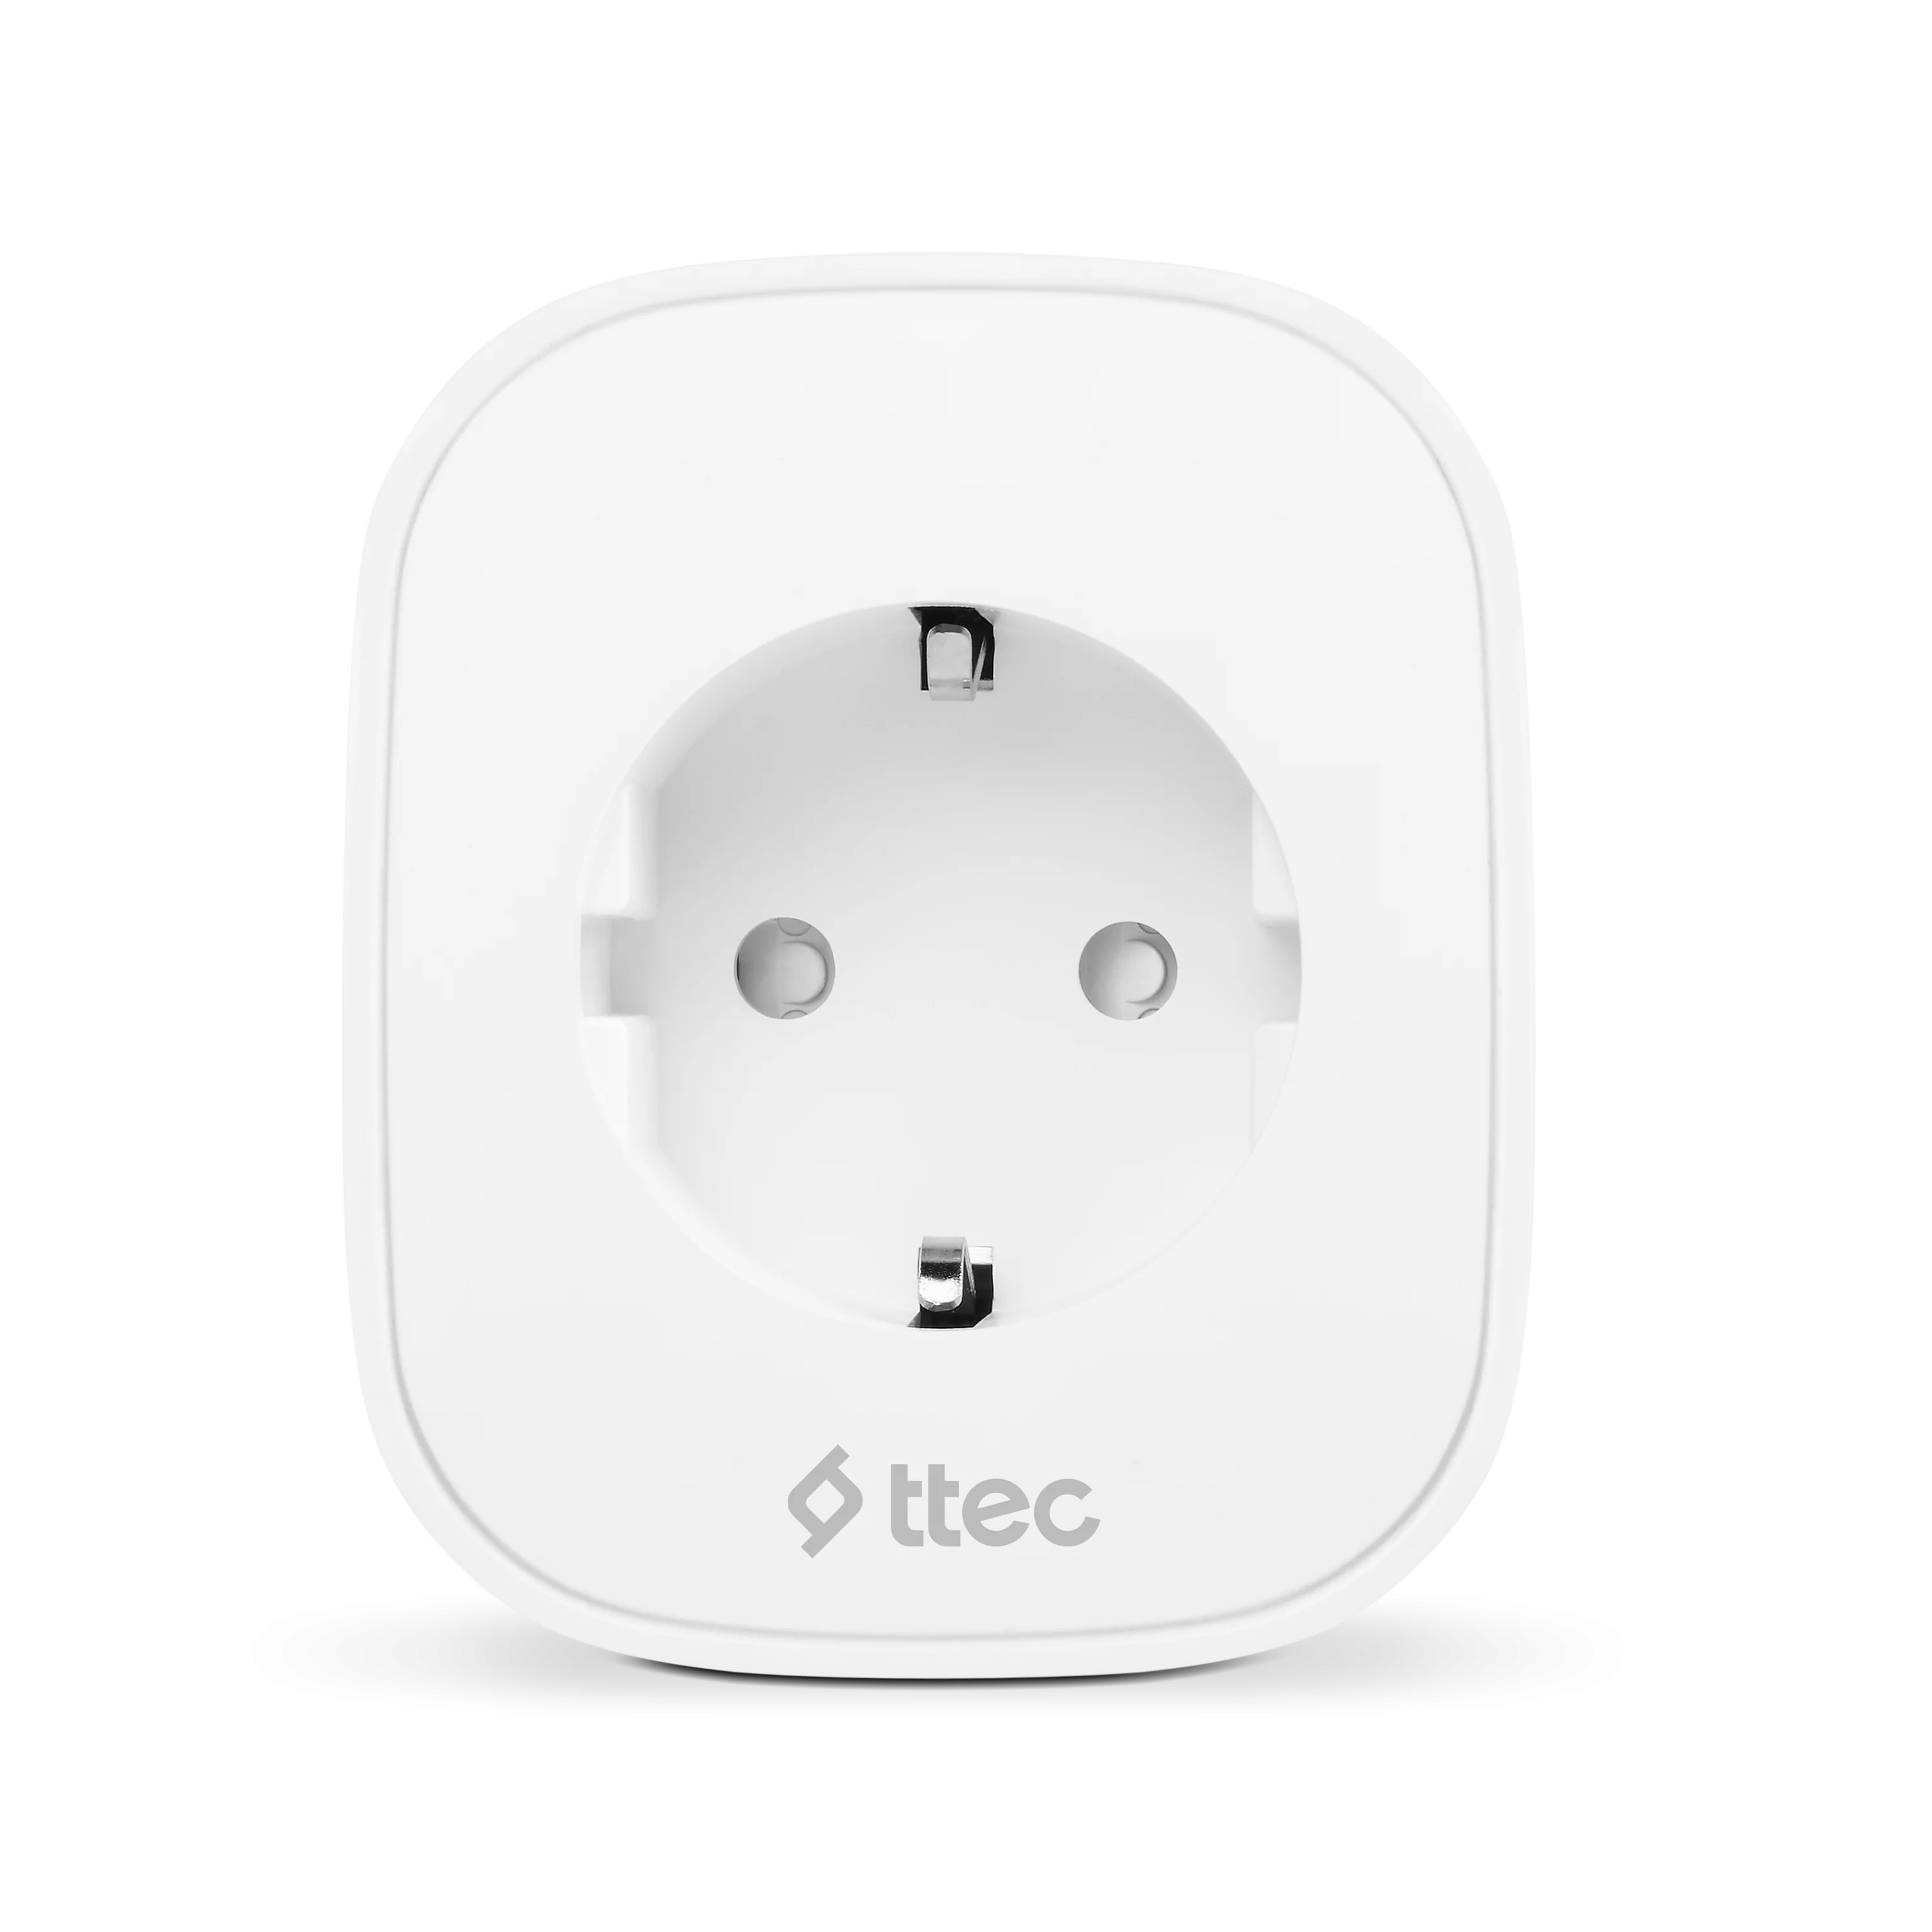 Ttec Prizi 16A WiFi Smart plug with Current Protection - White